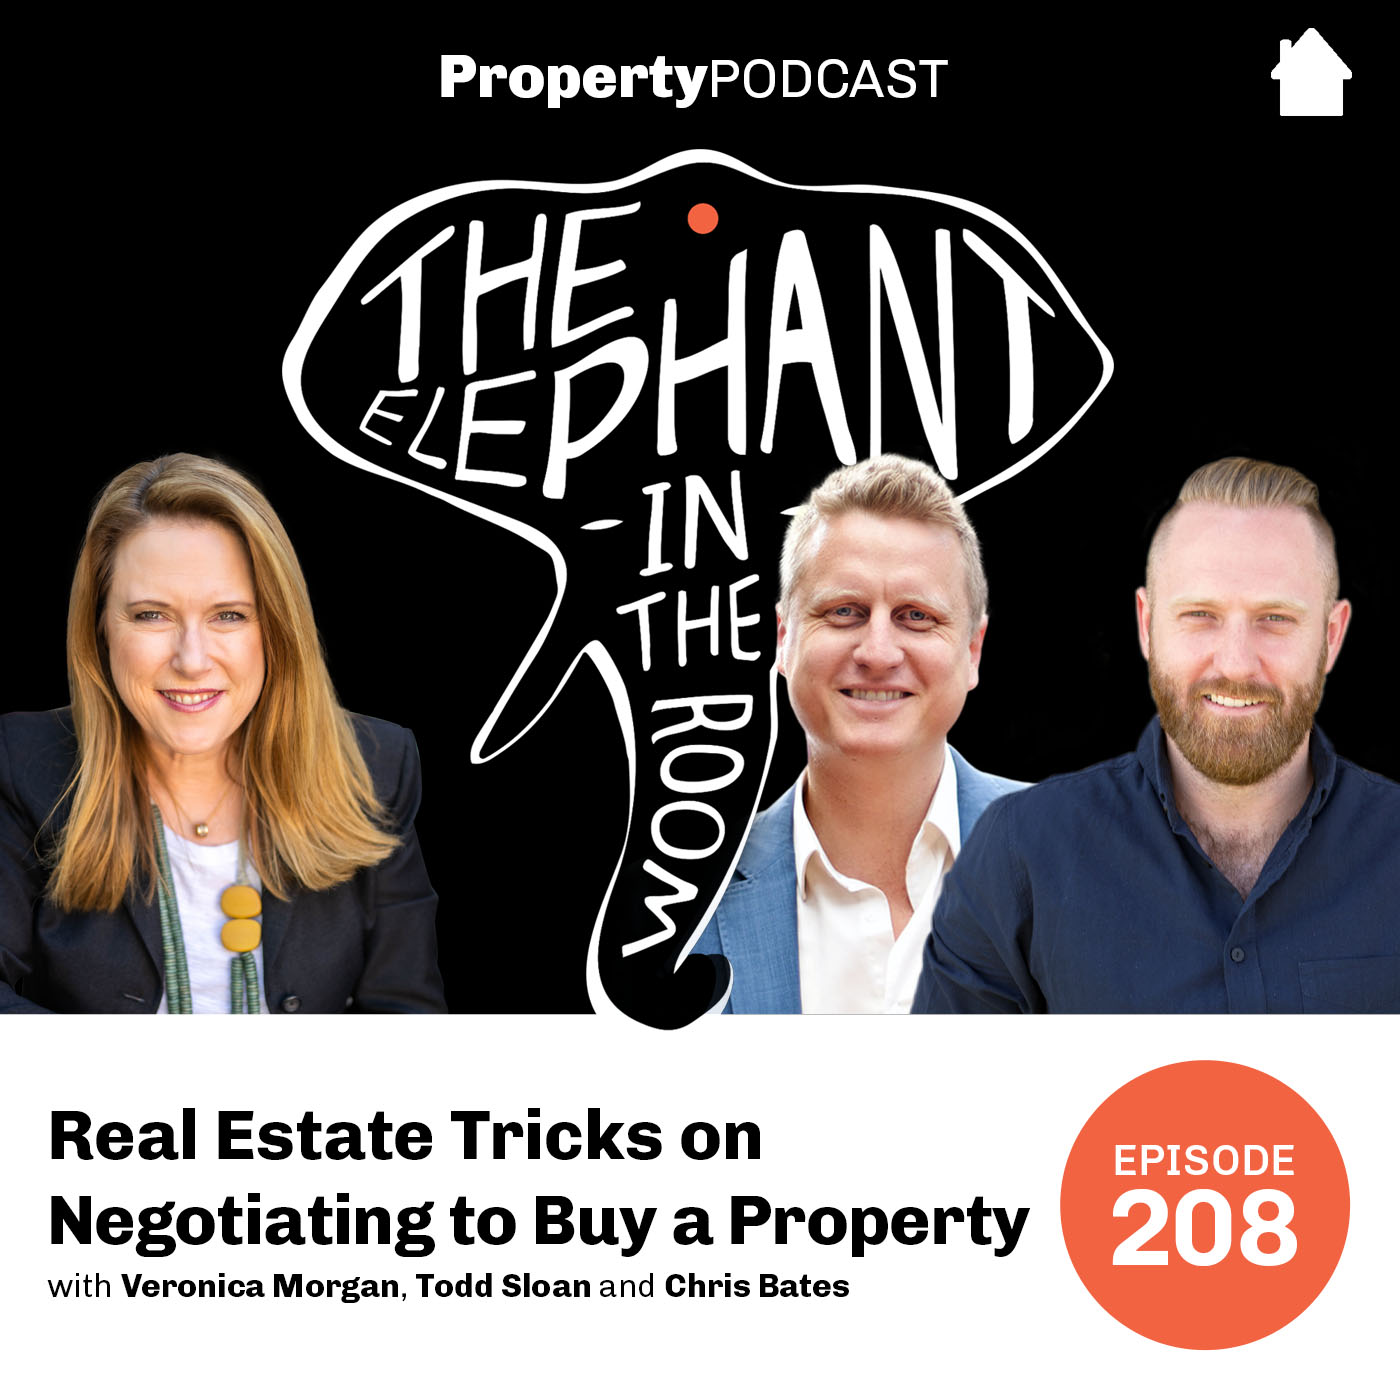 Todd Sloan | Real Estate Tricks on Negotiating to Buy a Property